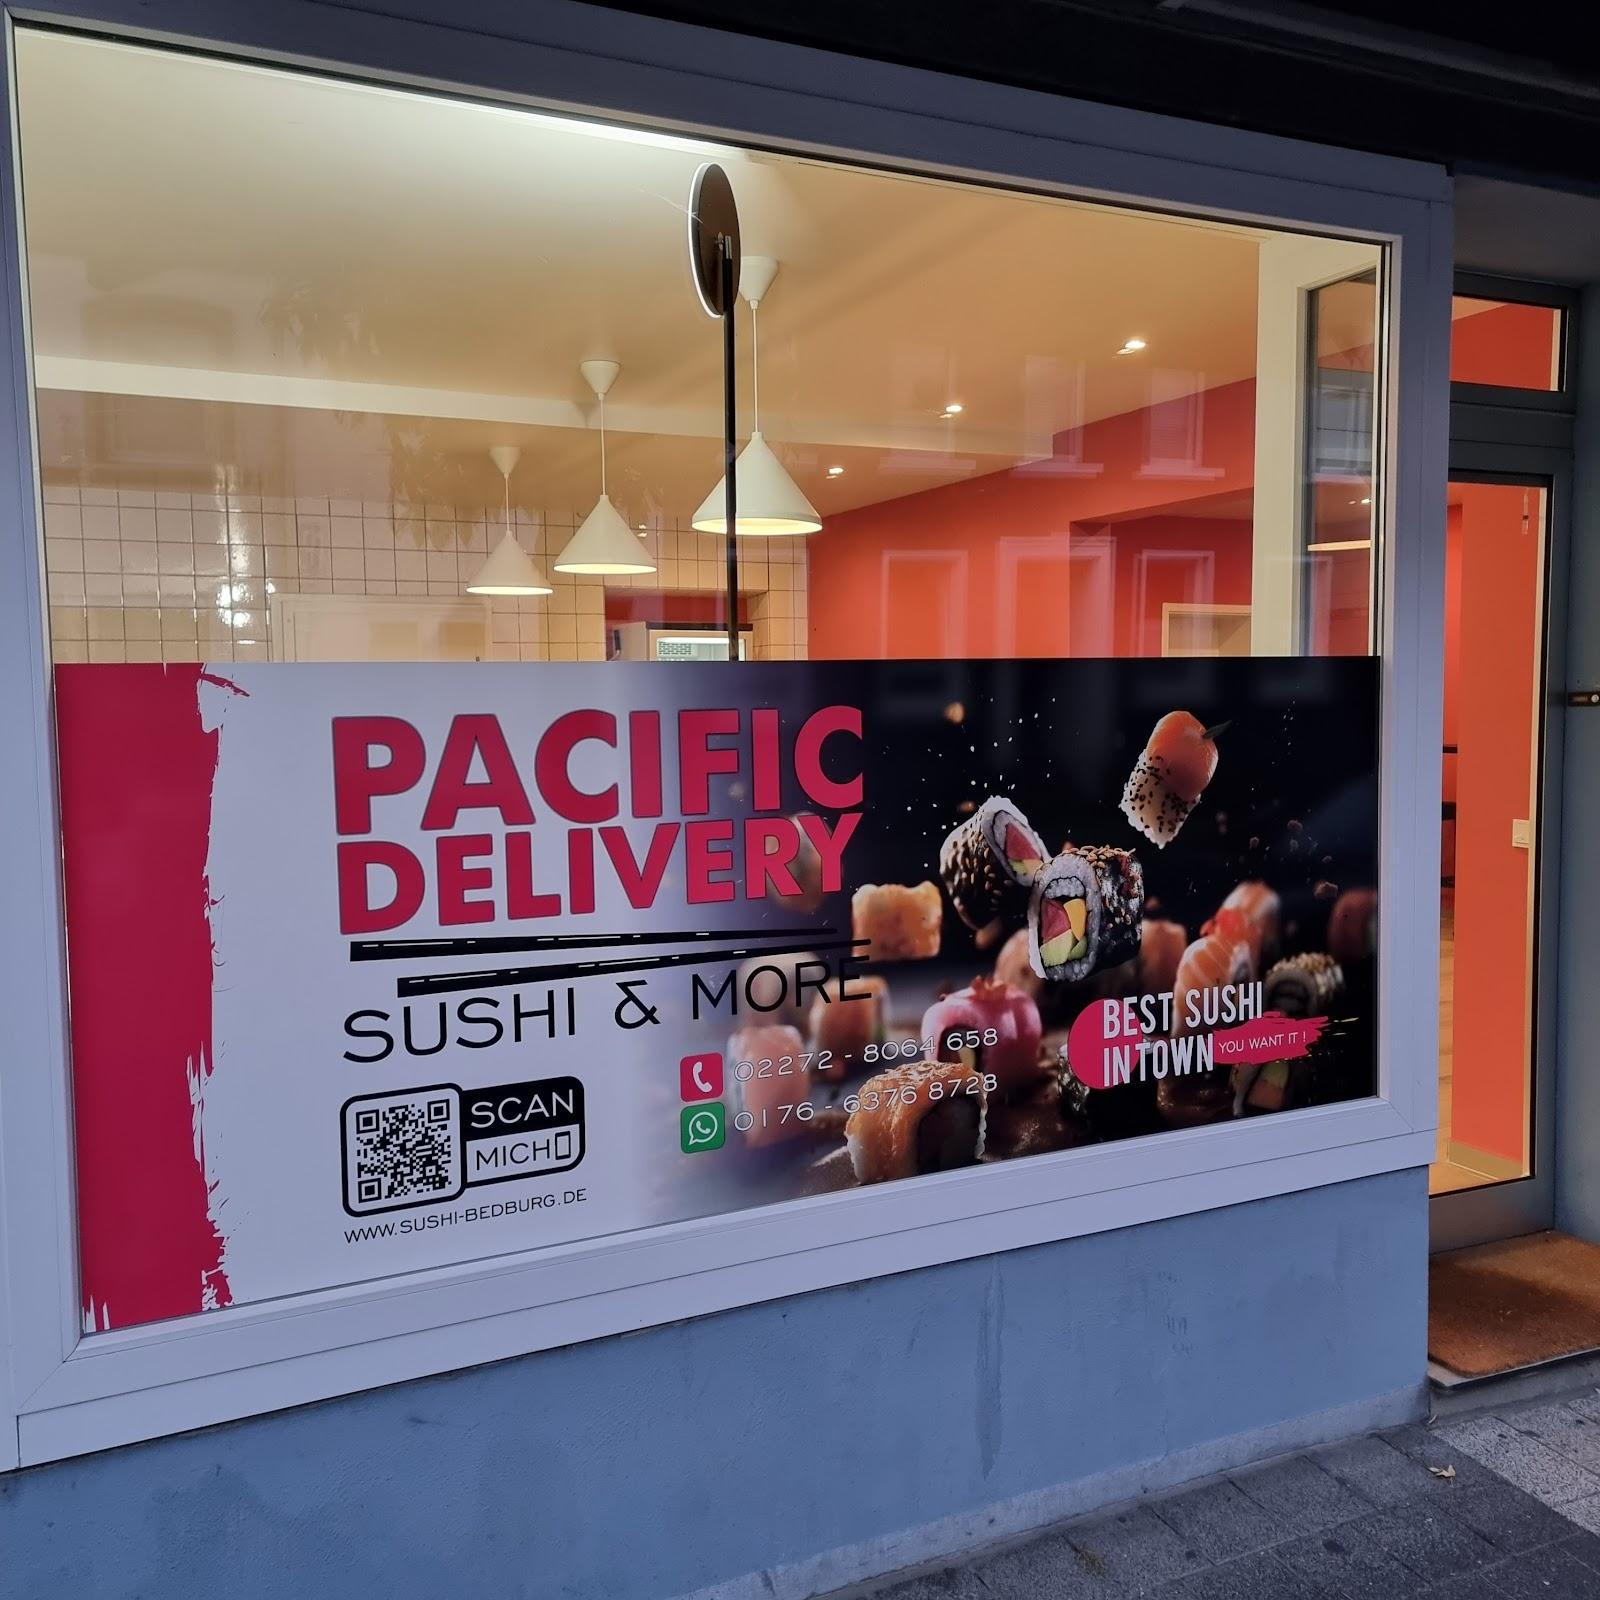 Restaurant "Pacific Delivery - sushi & more" in Bedburg